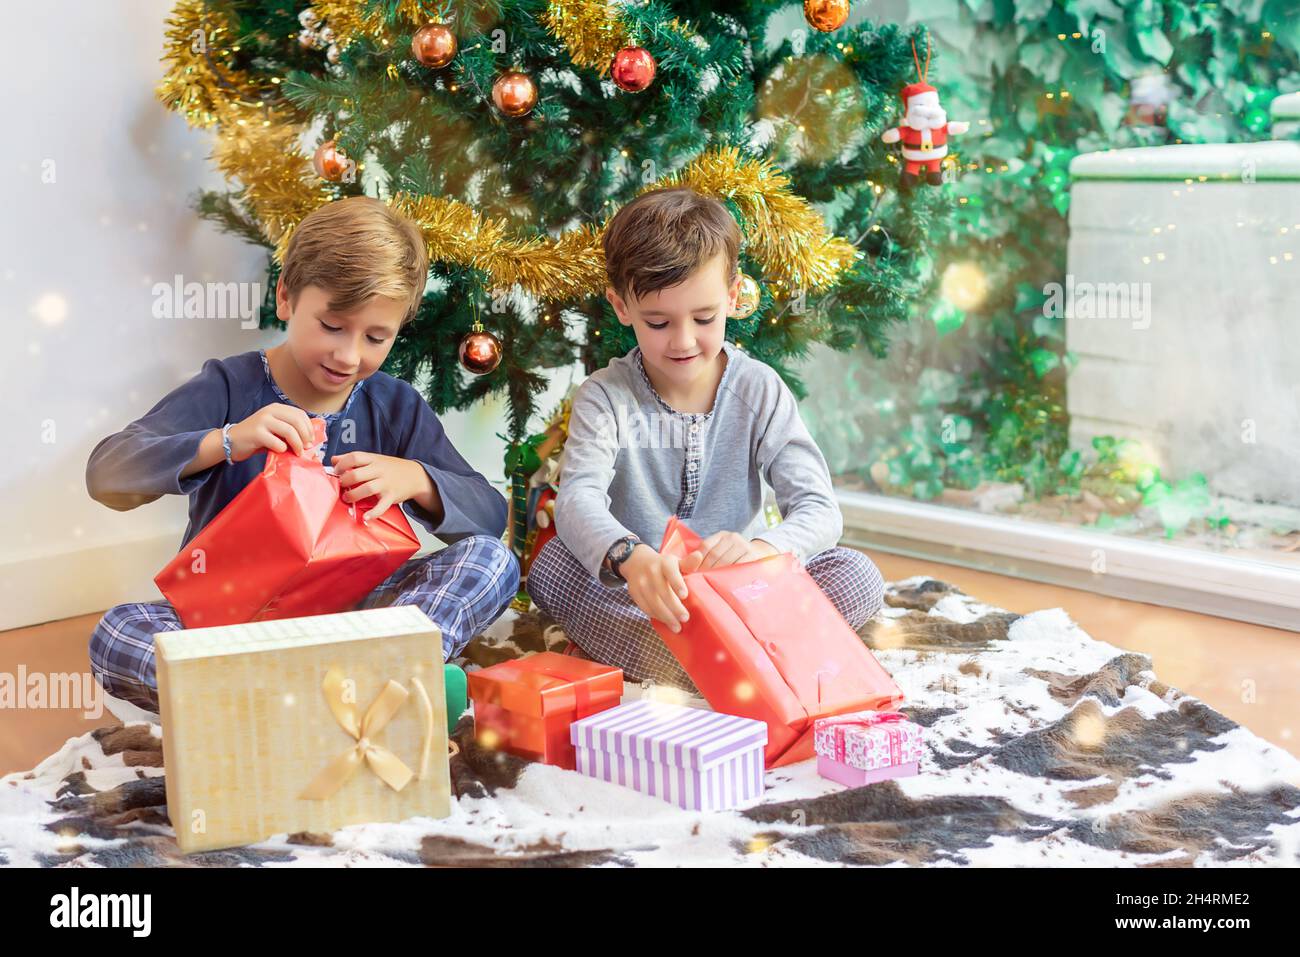 Two children by the Christmas tree opening their presents from Santa Claus or the Three Wise Men and sharing their toys Stock Photo